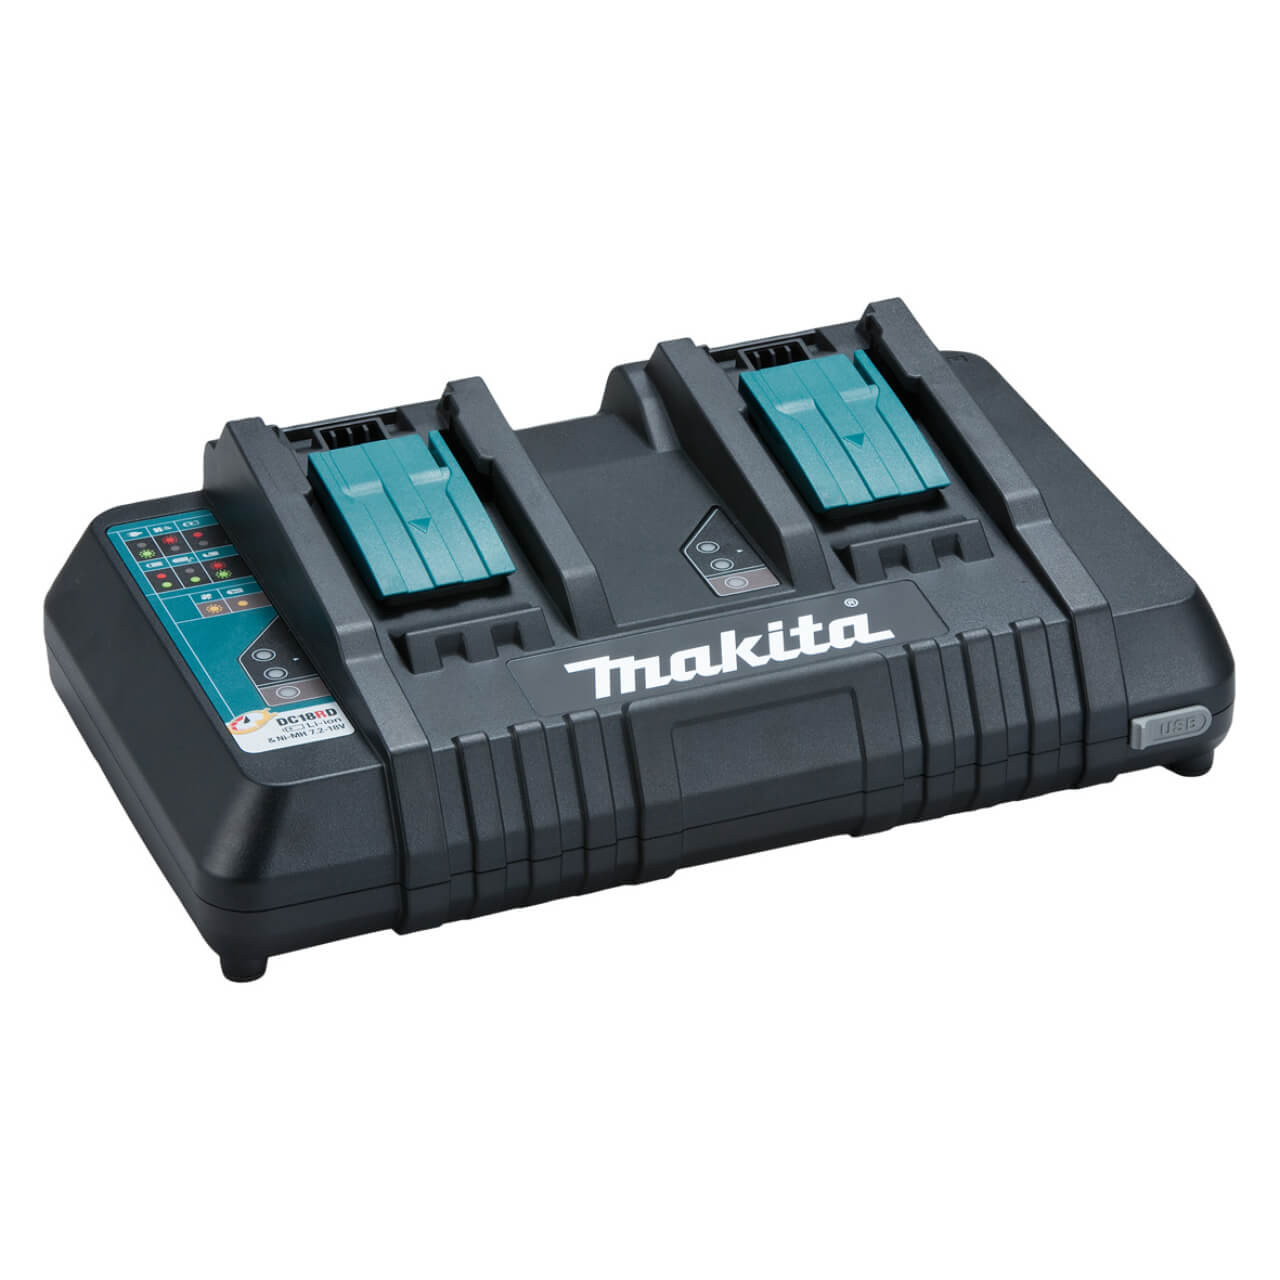 Makita 18Vx2 BRUSHLESS 165mm Plunge Saw Kit - Includes 2 x 5.0Ah Batteries. Dual Port Rapid Charger. 1400mm track & 2 x MakPac Case